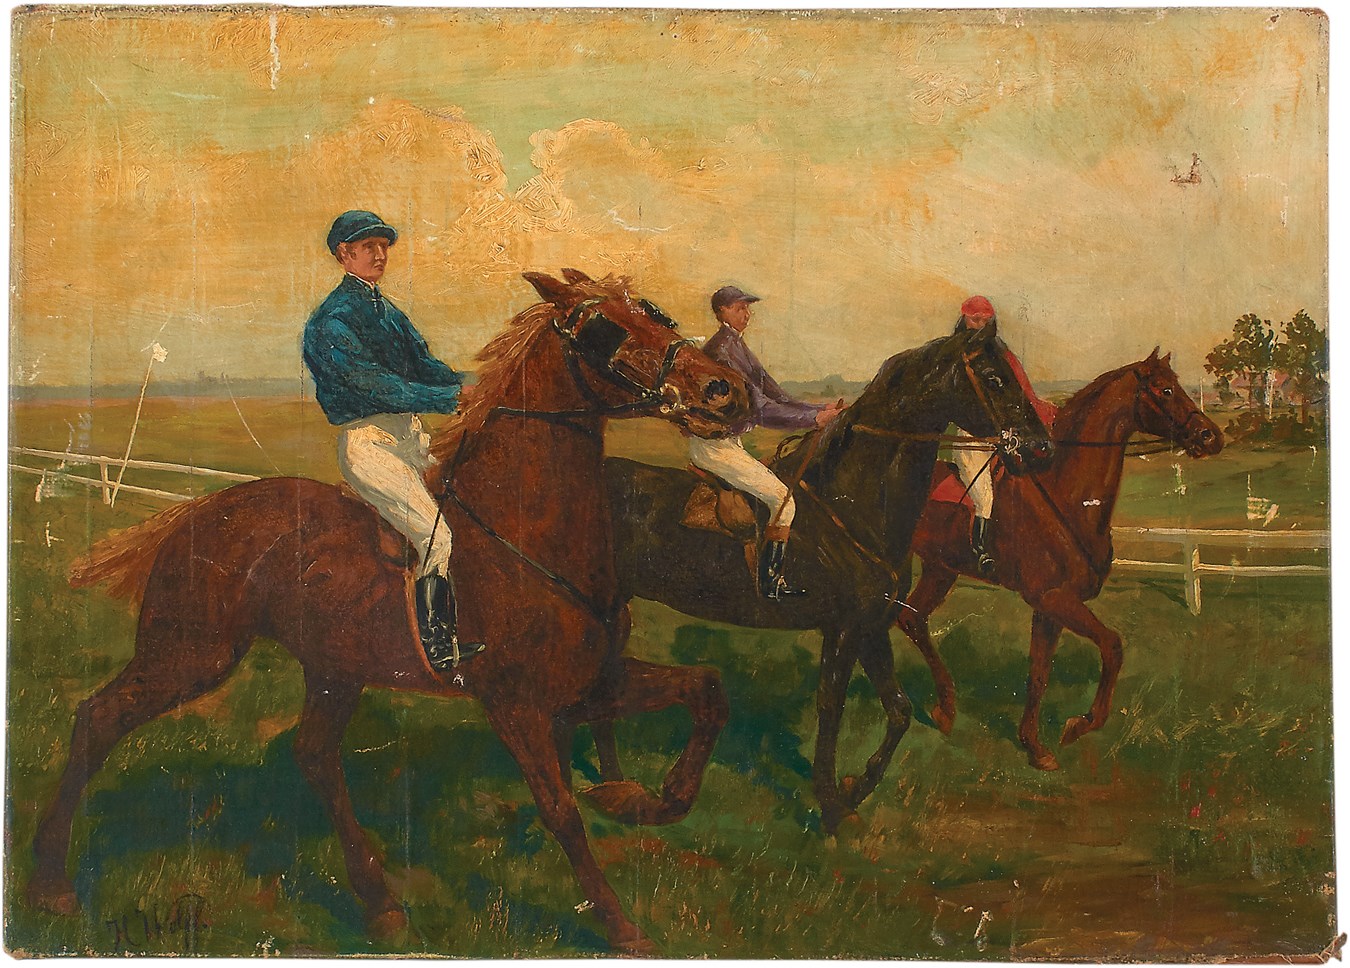 The Three Dominant Jockeys of the 19th Century Oil on Canvas by H. Wolff - Fred Archer, George Fordham & Nat Flatman